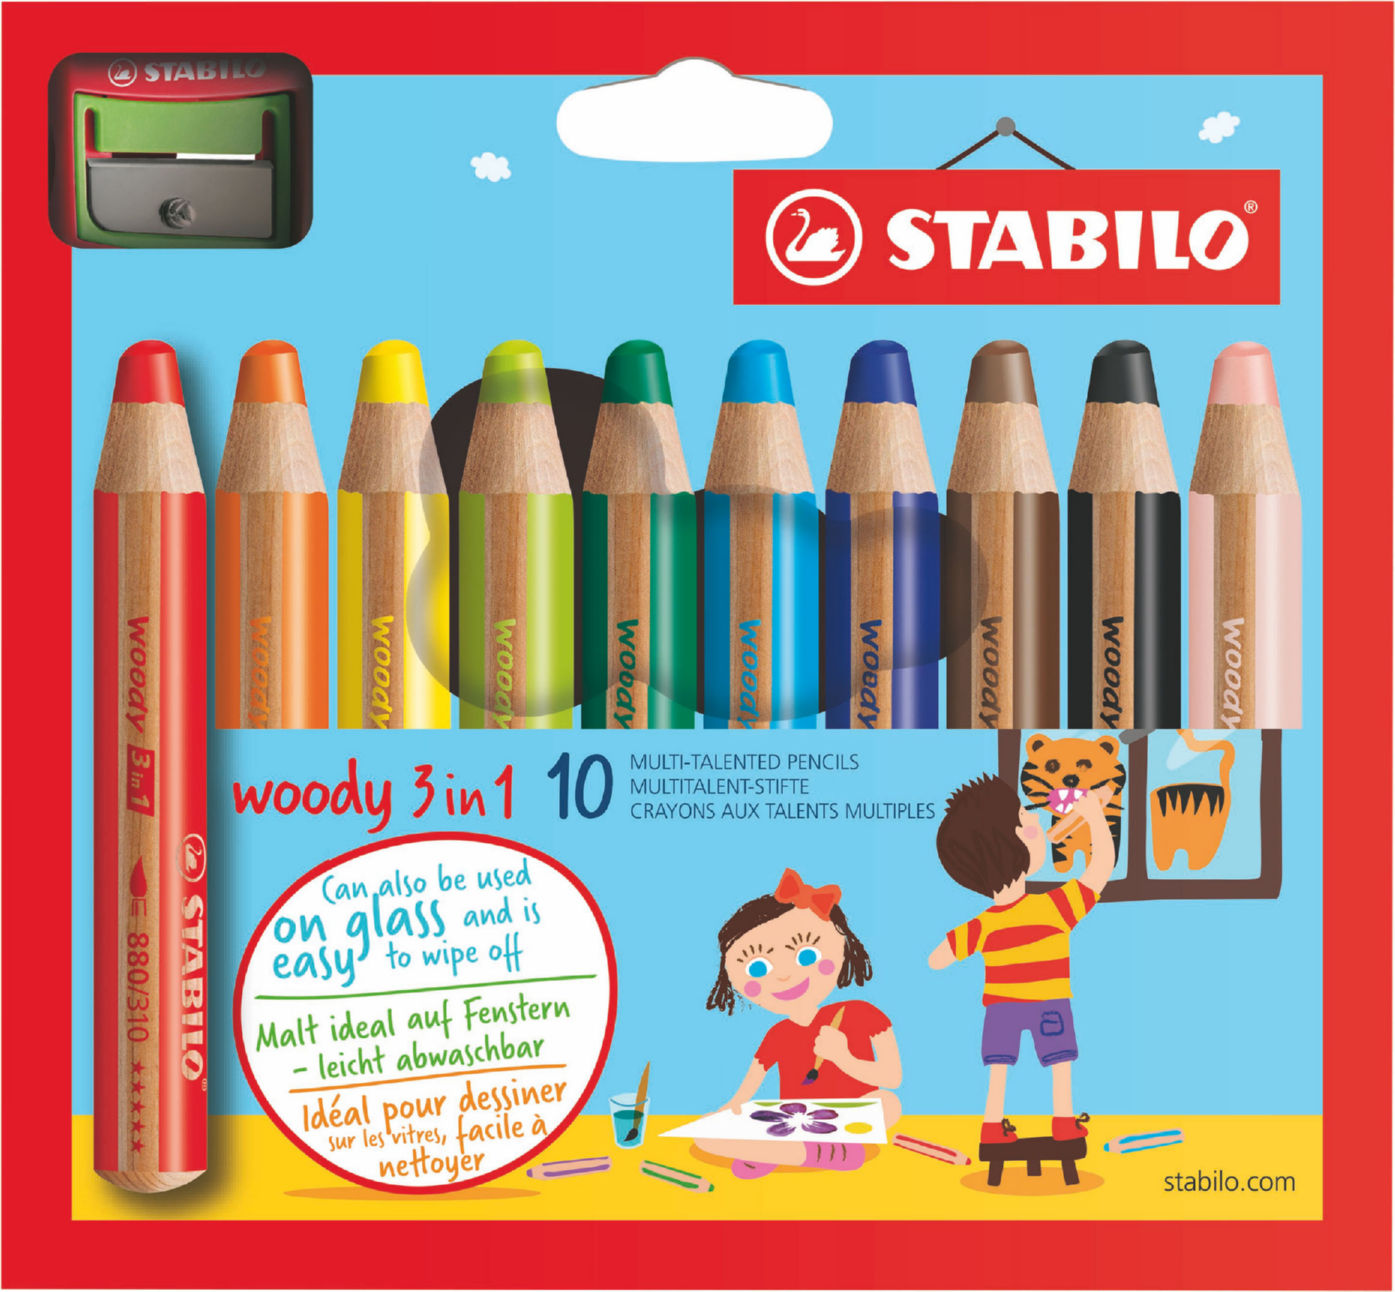 Colouring / Drawing Pencils STABILO woody 3 in 1 Colouring Pencil and Sharpener Set Assorted Colours (Pack 10)